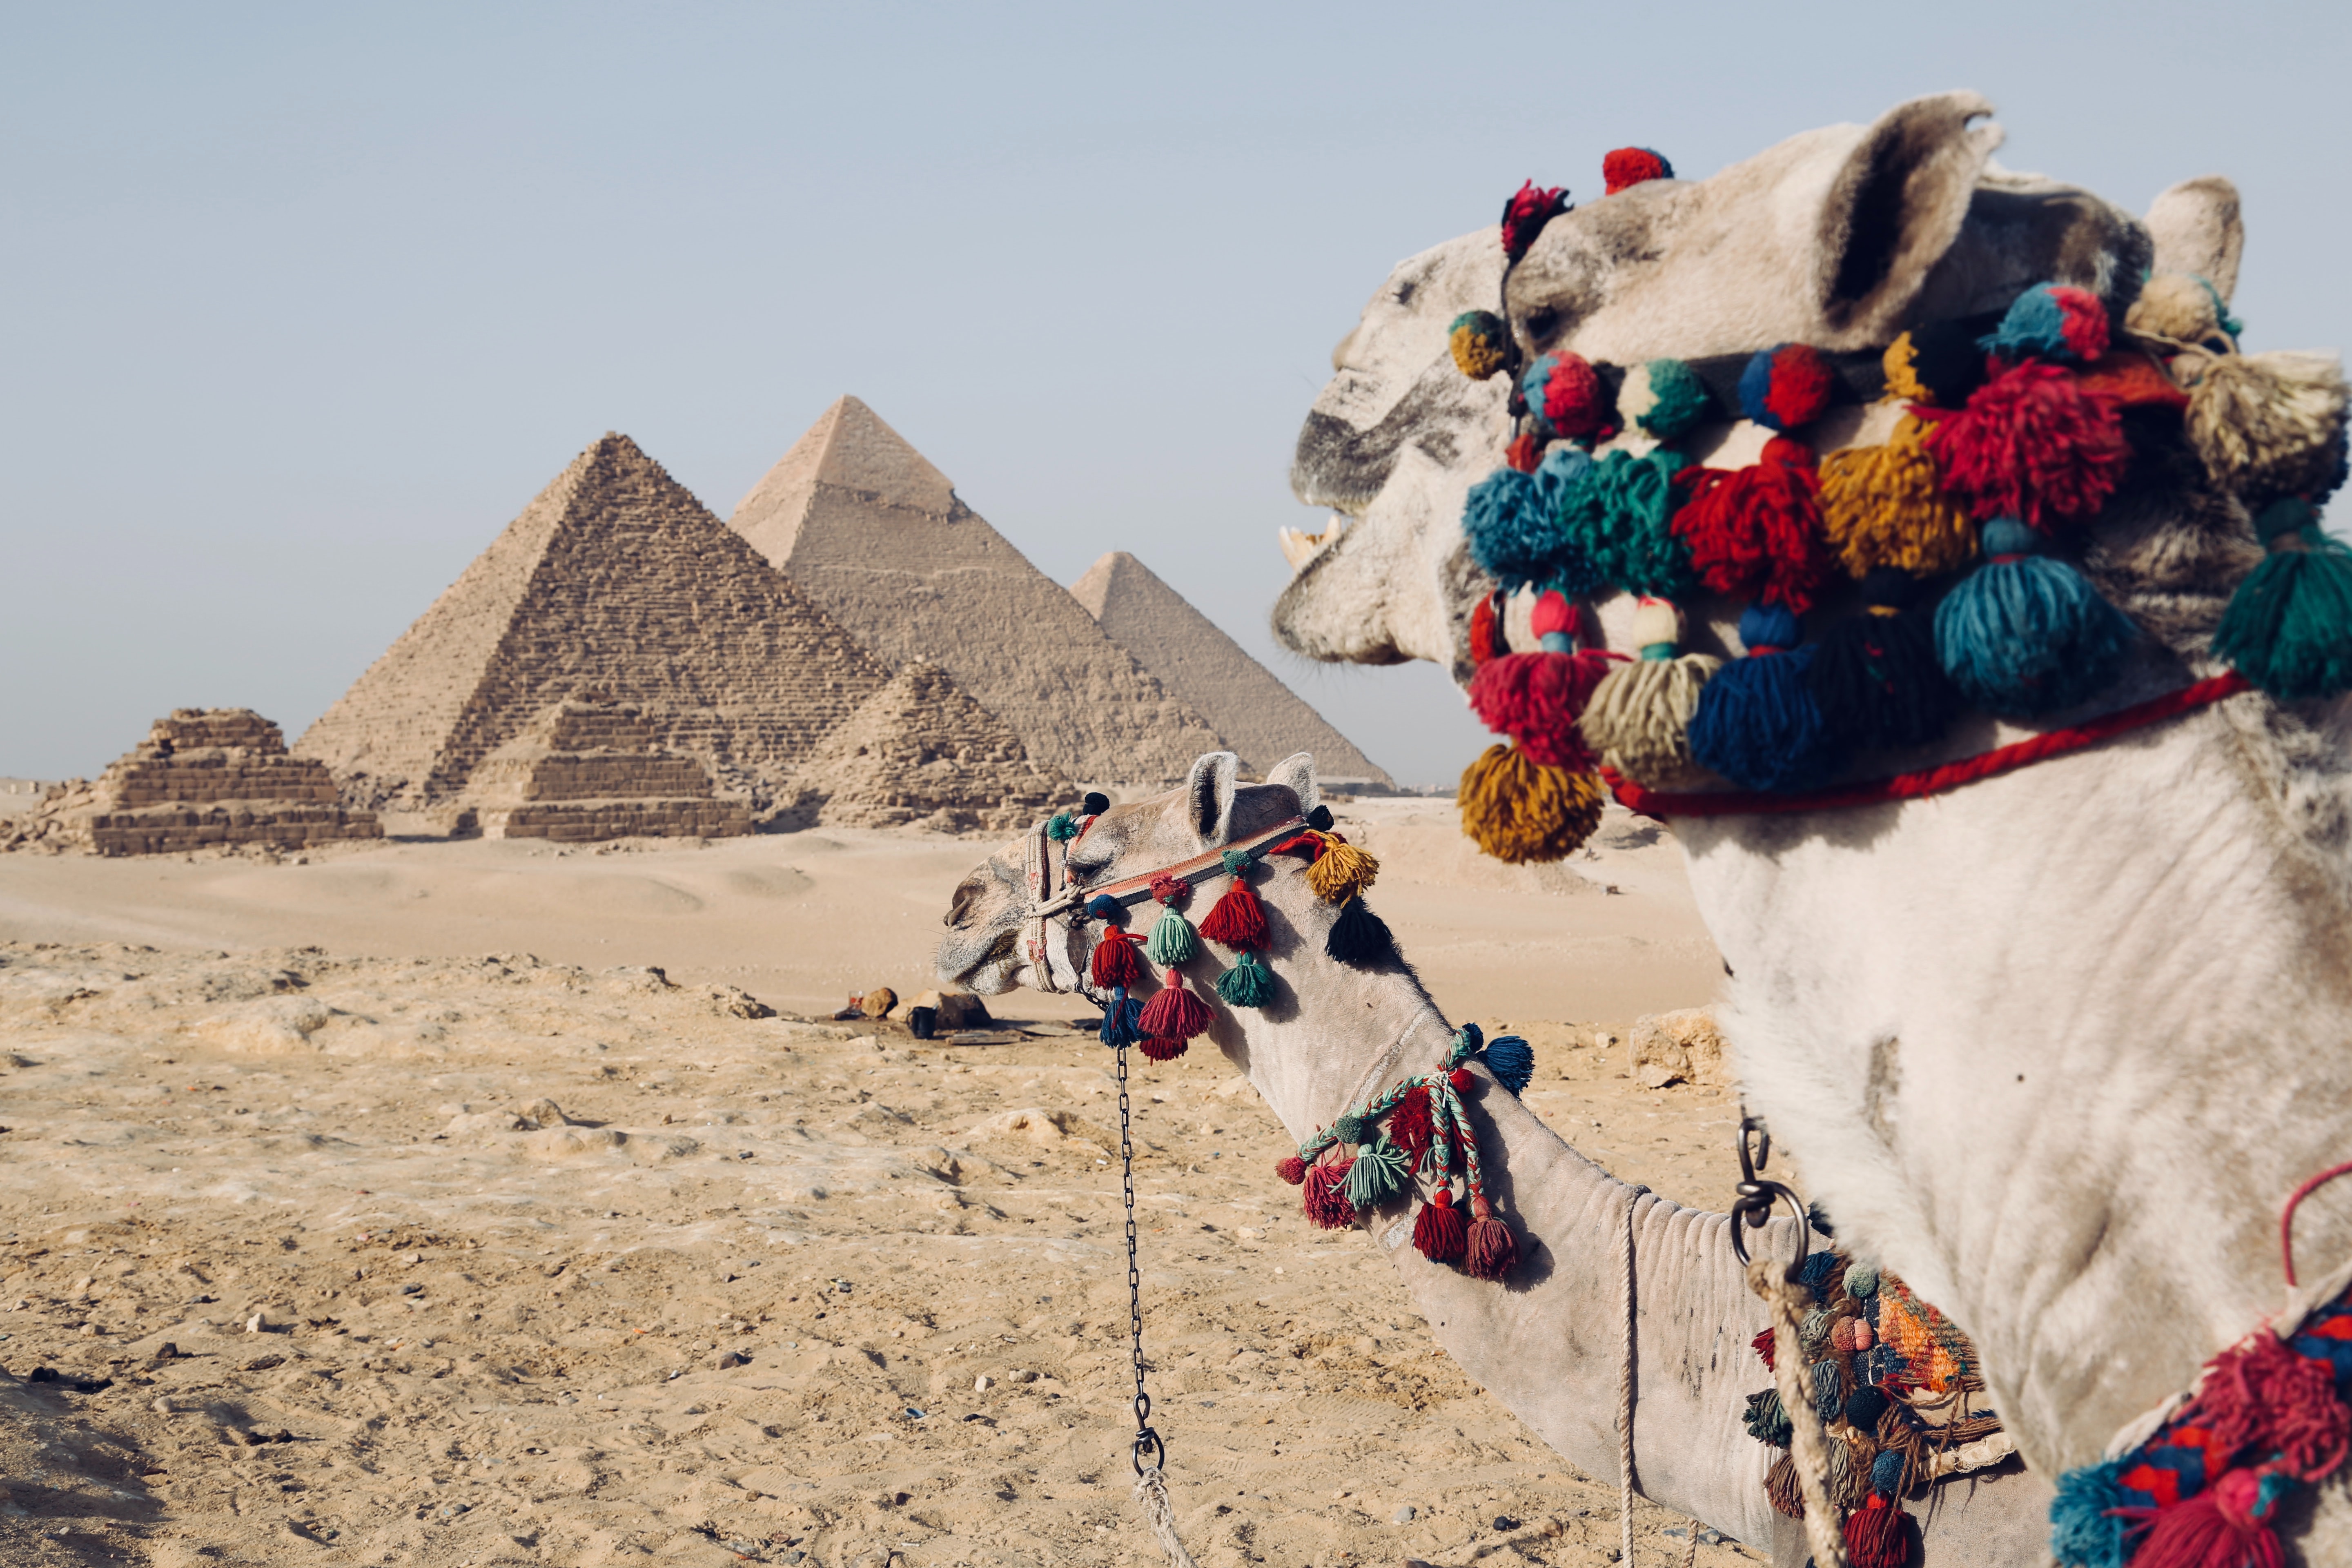 The Pyramids of Giza in Egypt with a camel.